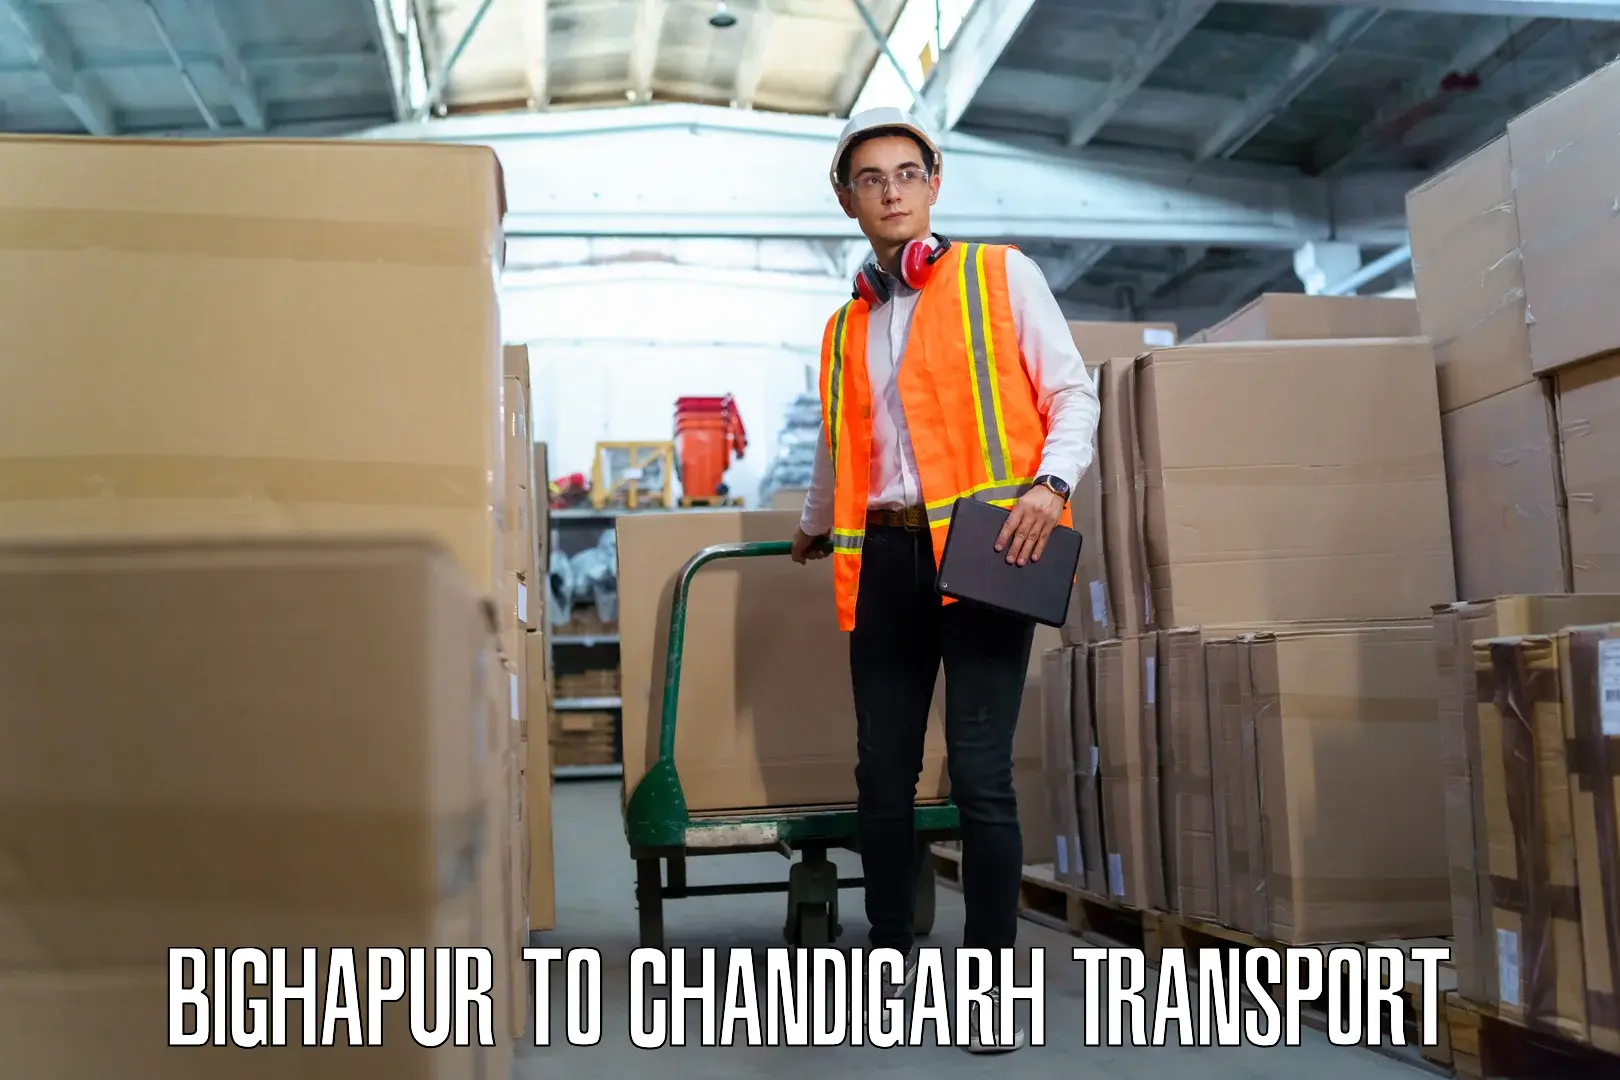 Air freight transport services Bighapur to Chandigarh